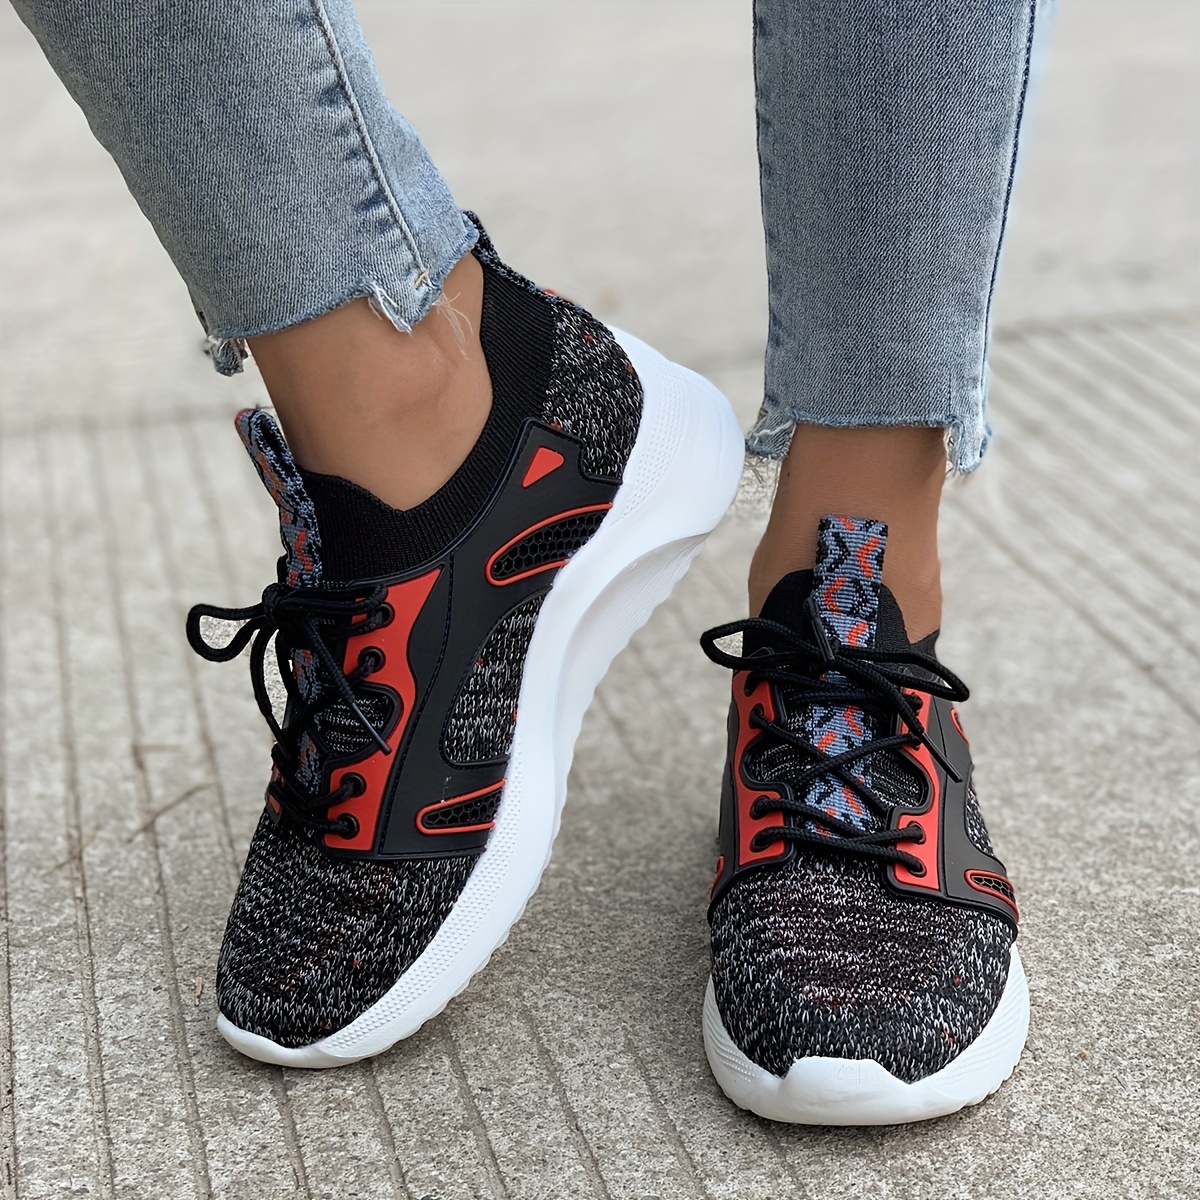 Women's Knitted Sports Shoes, Comfort Lace Up Low Top Running & Tennis  Sneakers, Breathable Gym Athletic Shoes